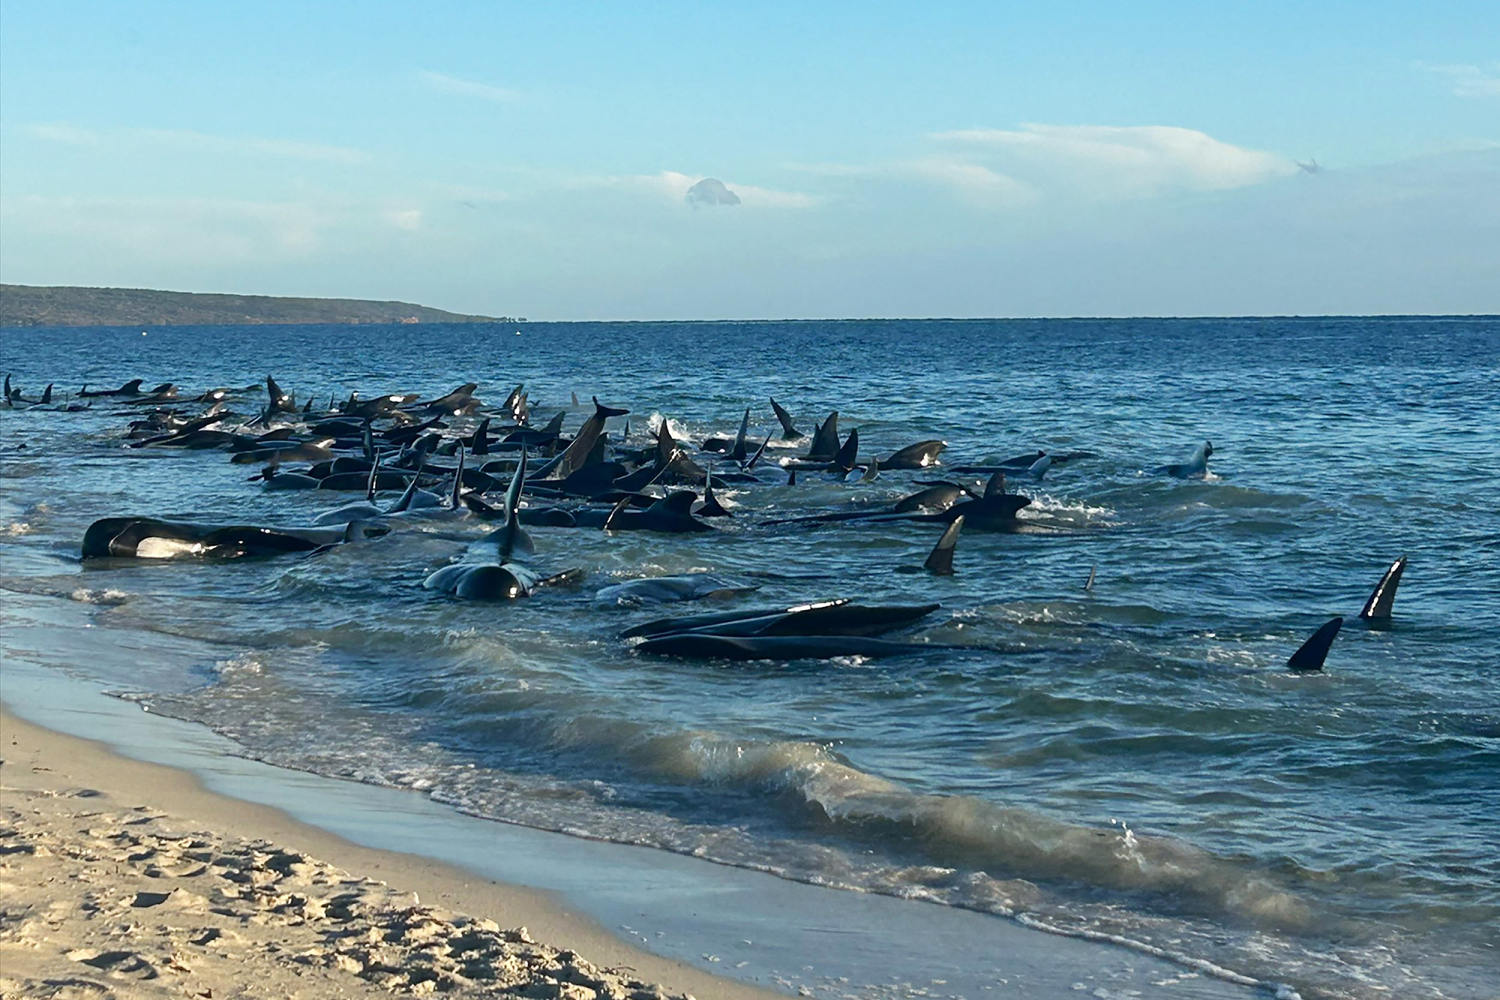 More than 100 pilot whales are stranded in Western Australia, experts say